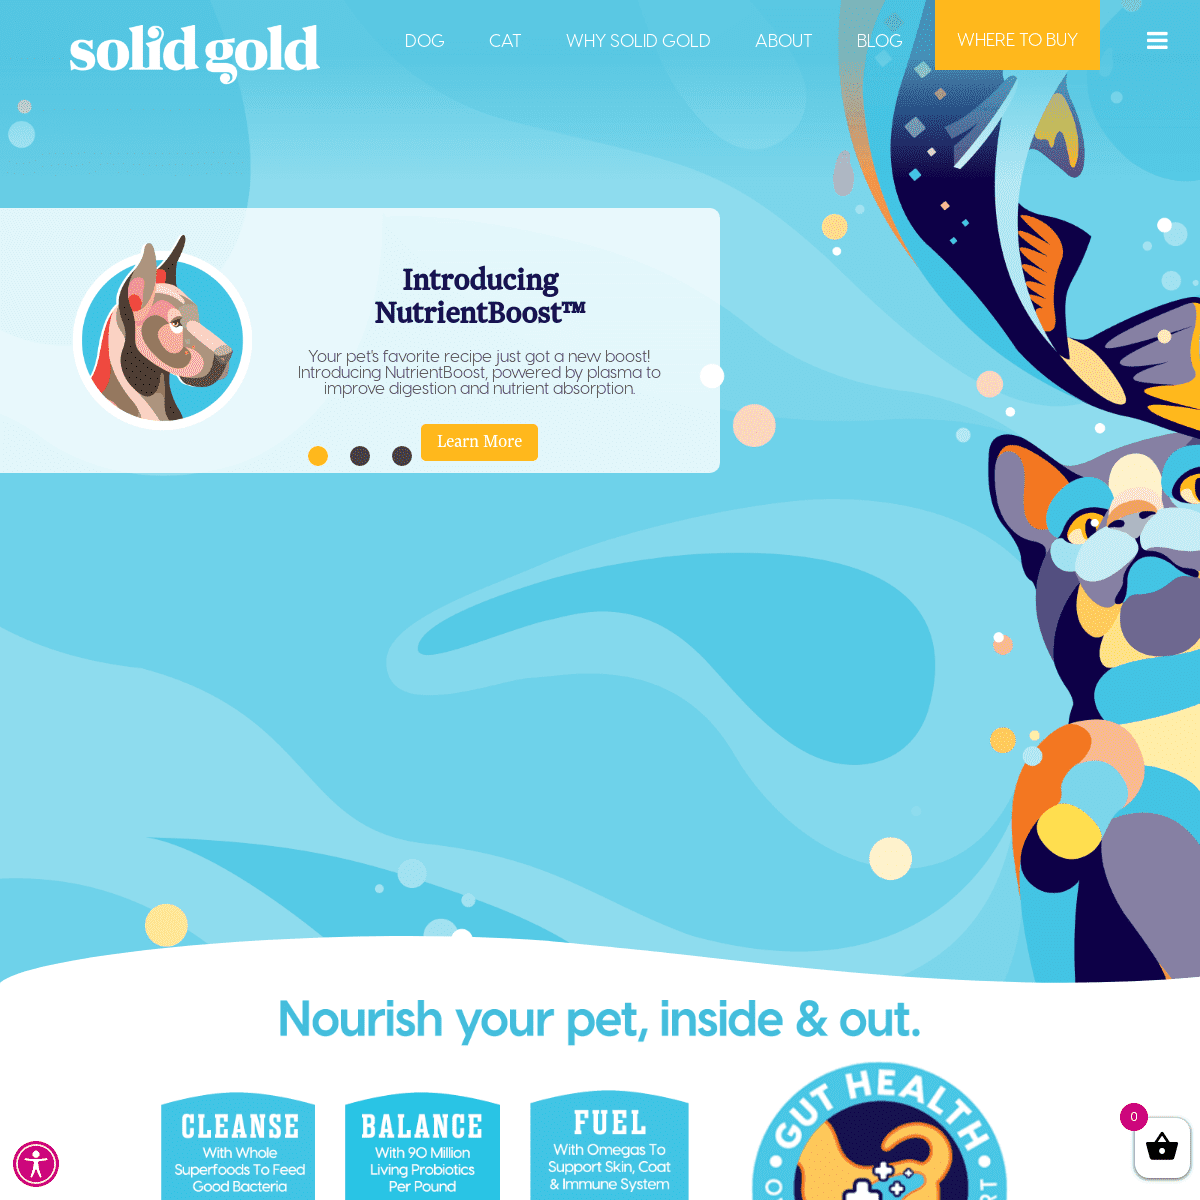 A complete backup of https://solidgoldpet.com